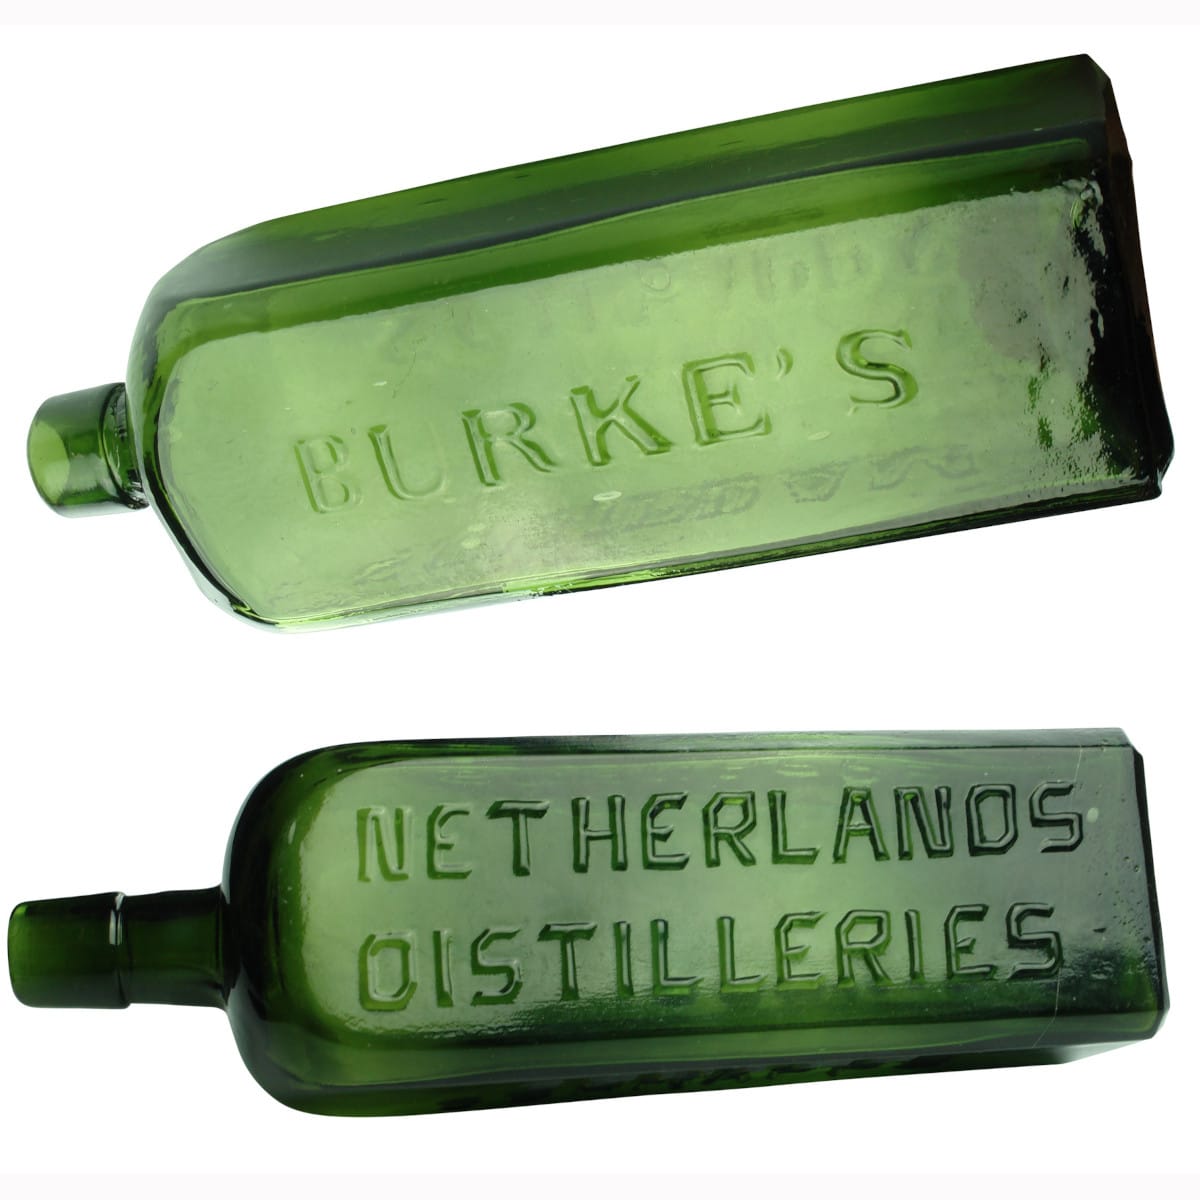 Pair of Schnapps: Burke's and Square, Netherland Distilleries.